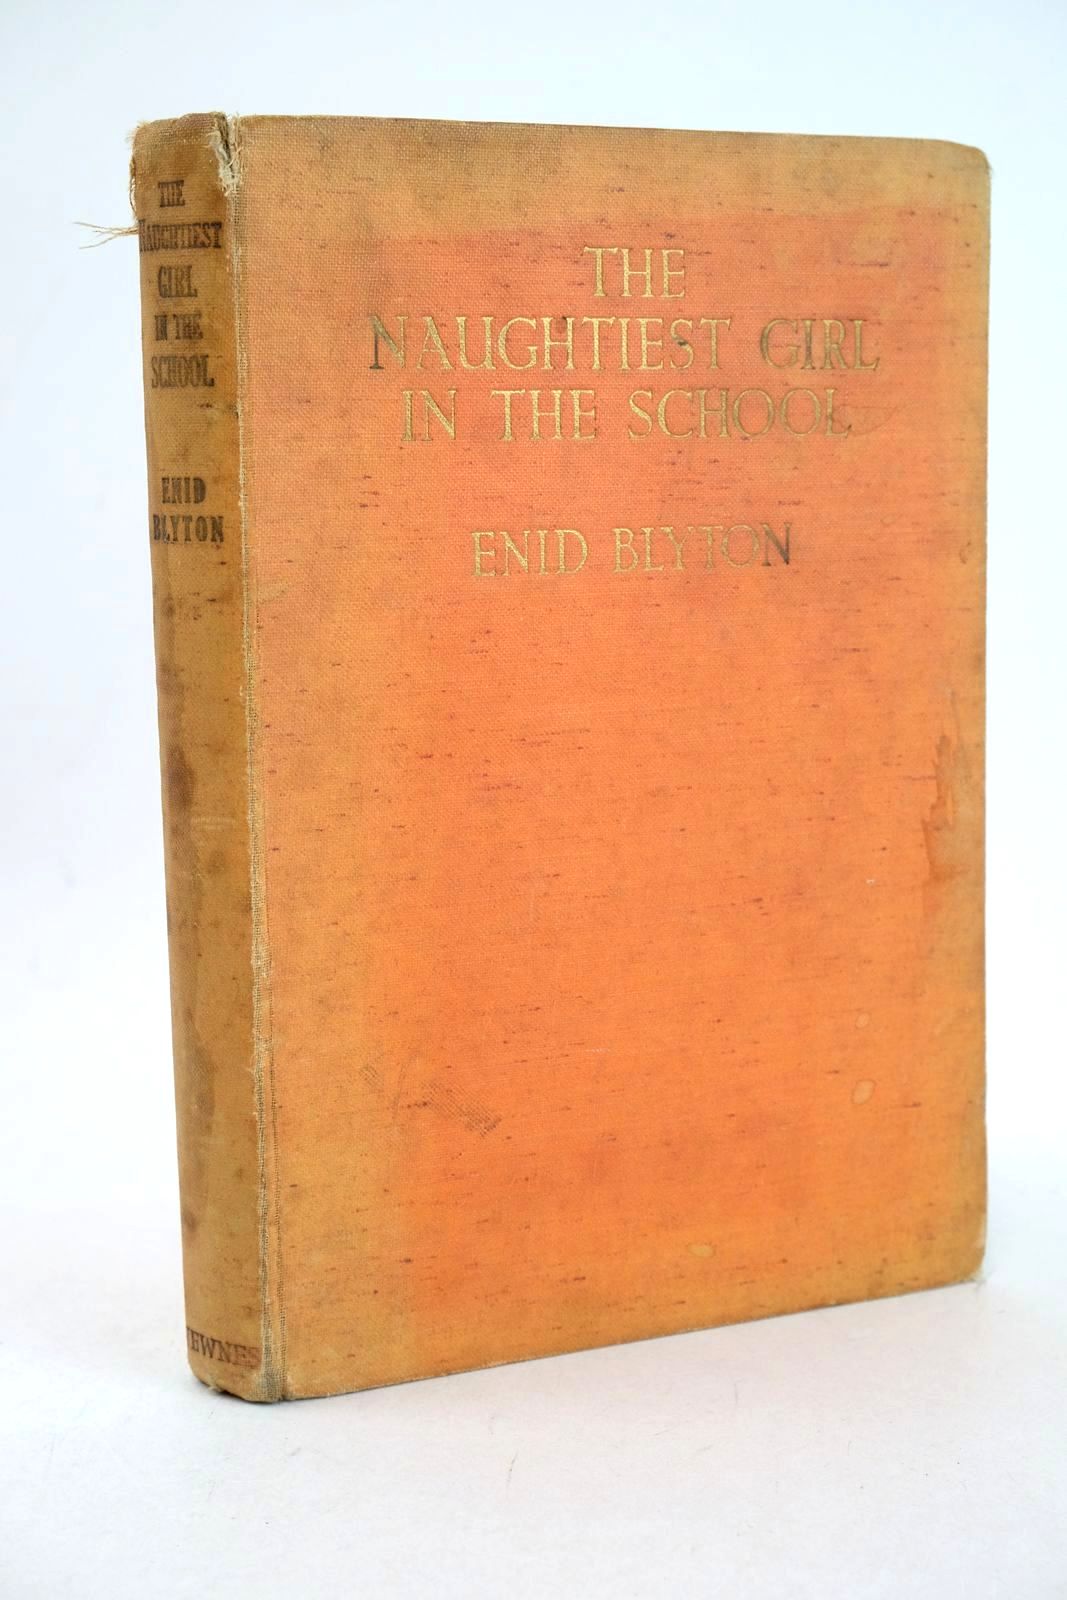 Photo of THE NAUGHTIEST GIRL IN THE SCHOOL written by Blyton, Enid illustrated by Cable, W. Lindsay published by George Newnes Limited (STOCK CODE: 1326890)  for sale by Stella & Rose's Books